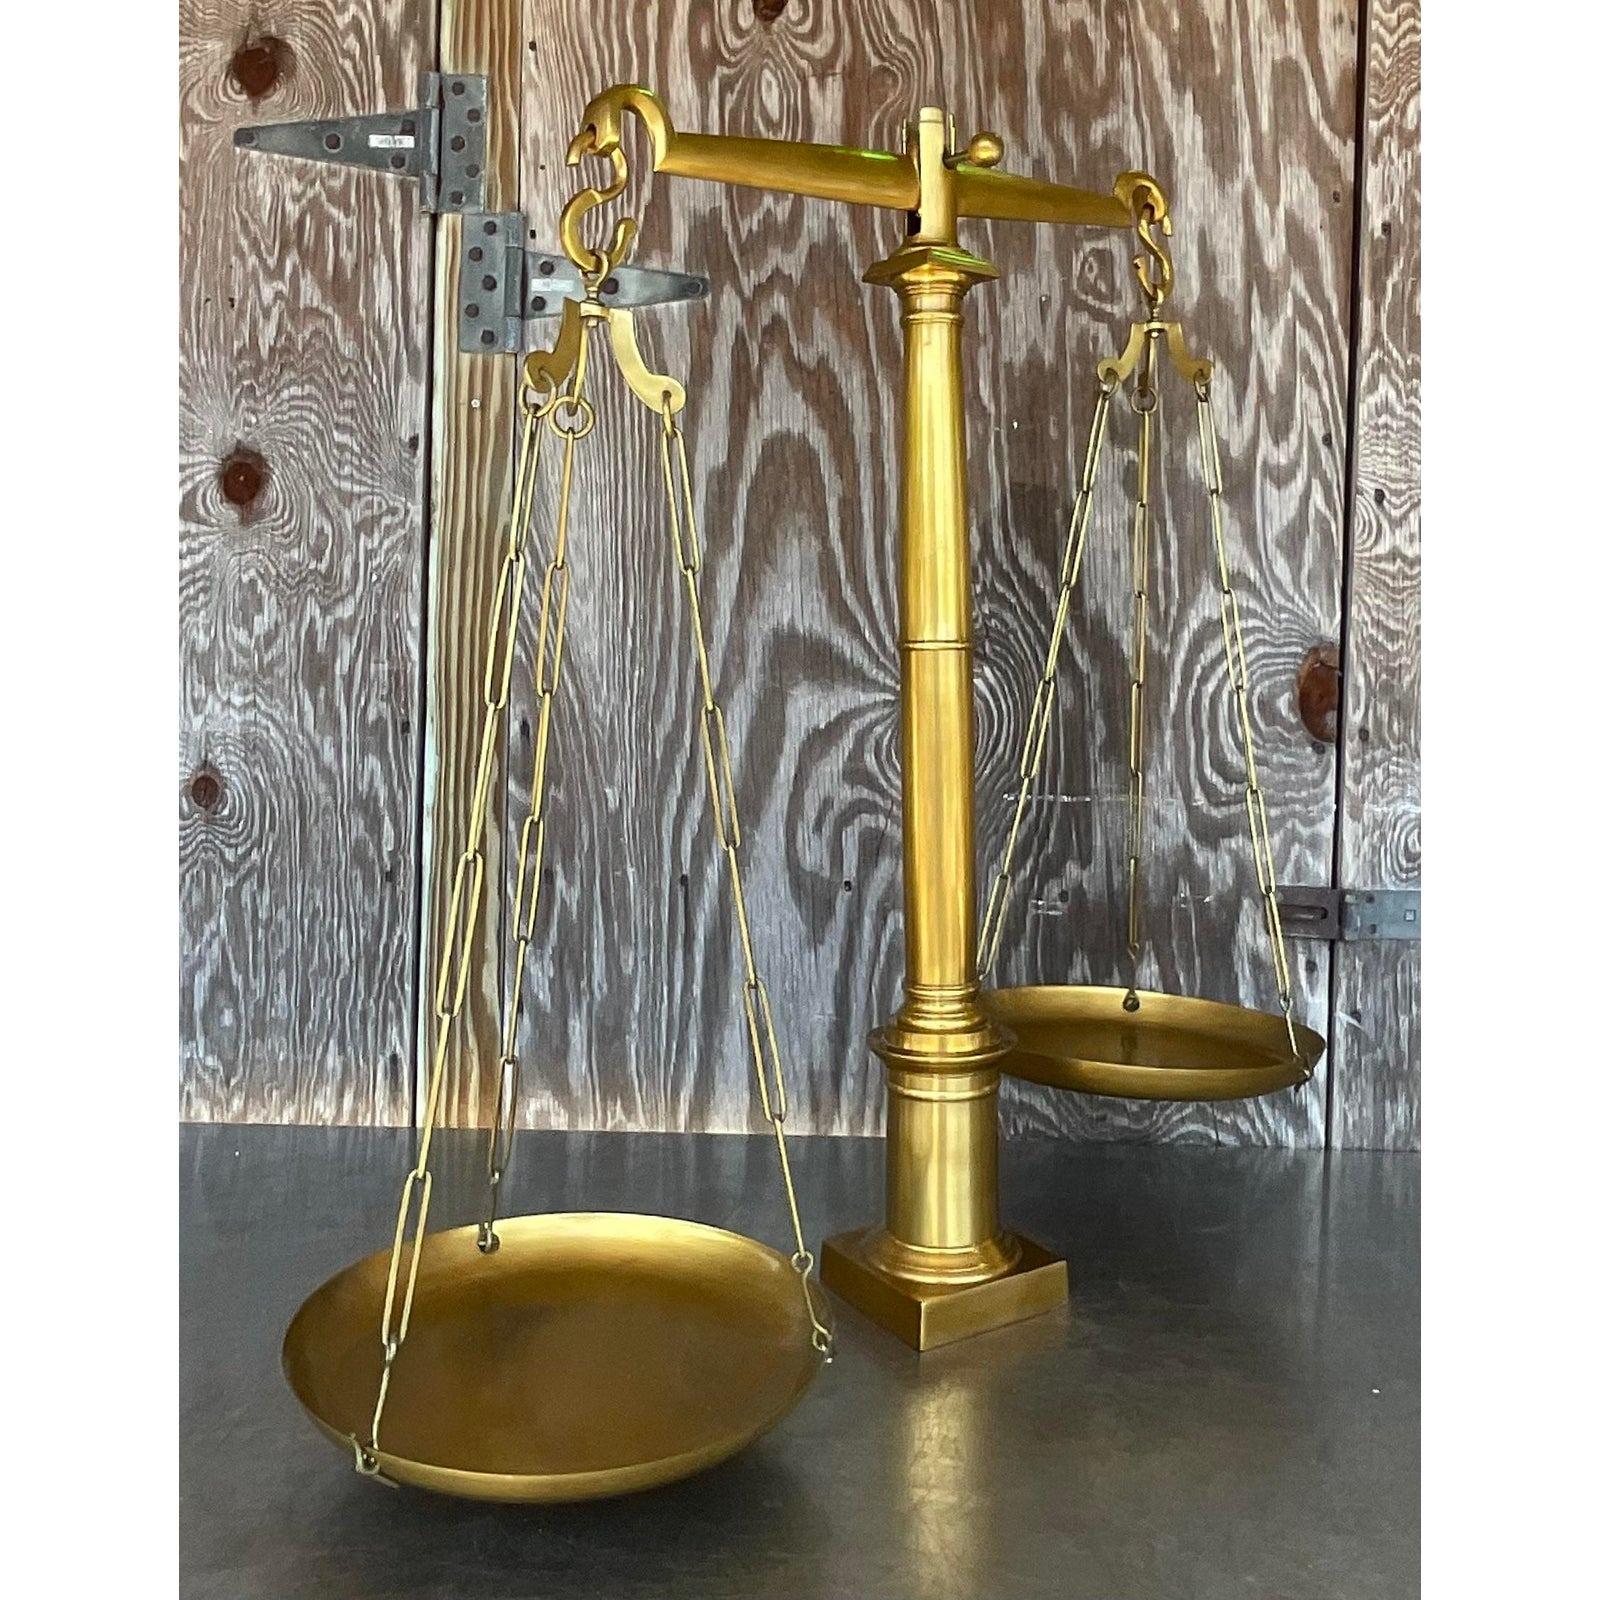 A fantastic vintage Boho Library scale. Monumental in size and drama. Made by the Global Views group. Handmade in solid brass. Acquired from a Palm Beach estate.